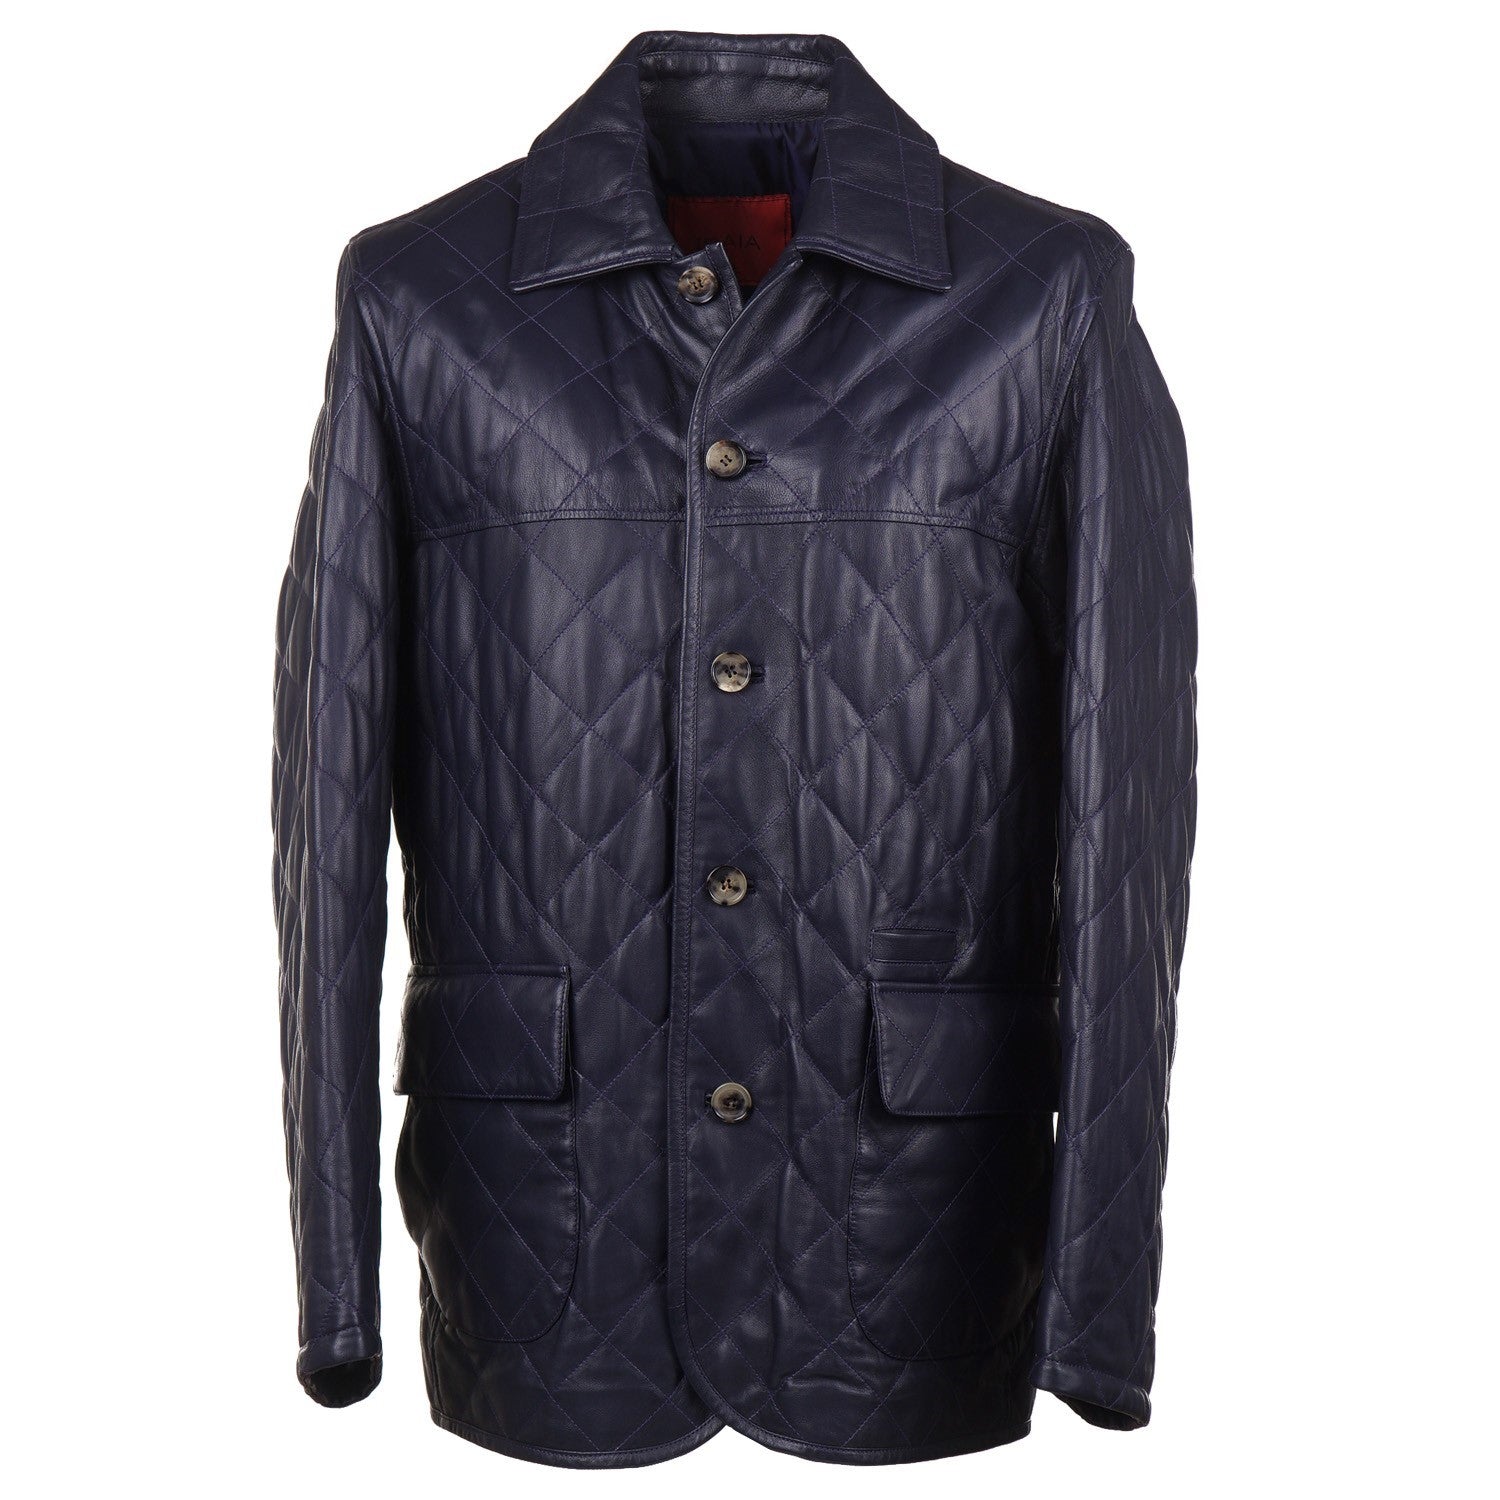 Isaia Diamond Quilted Leather Jacket in Navy - Top Shelf Apparel